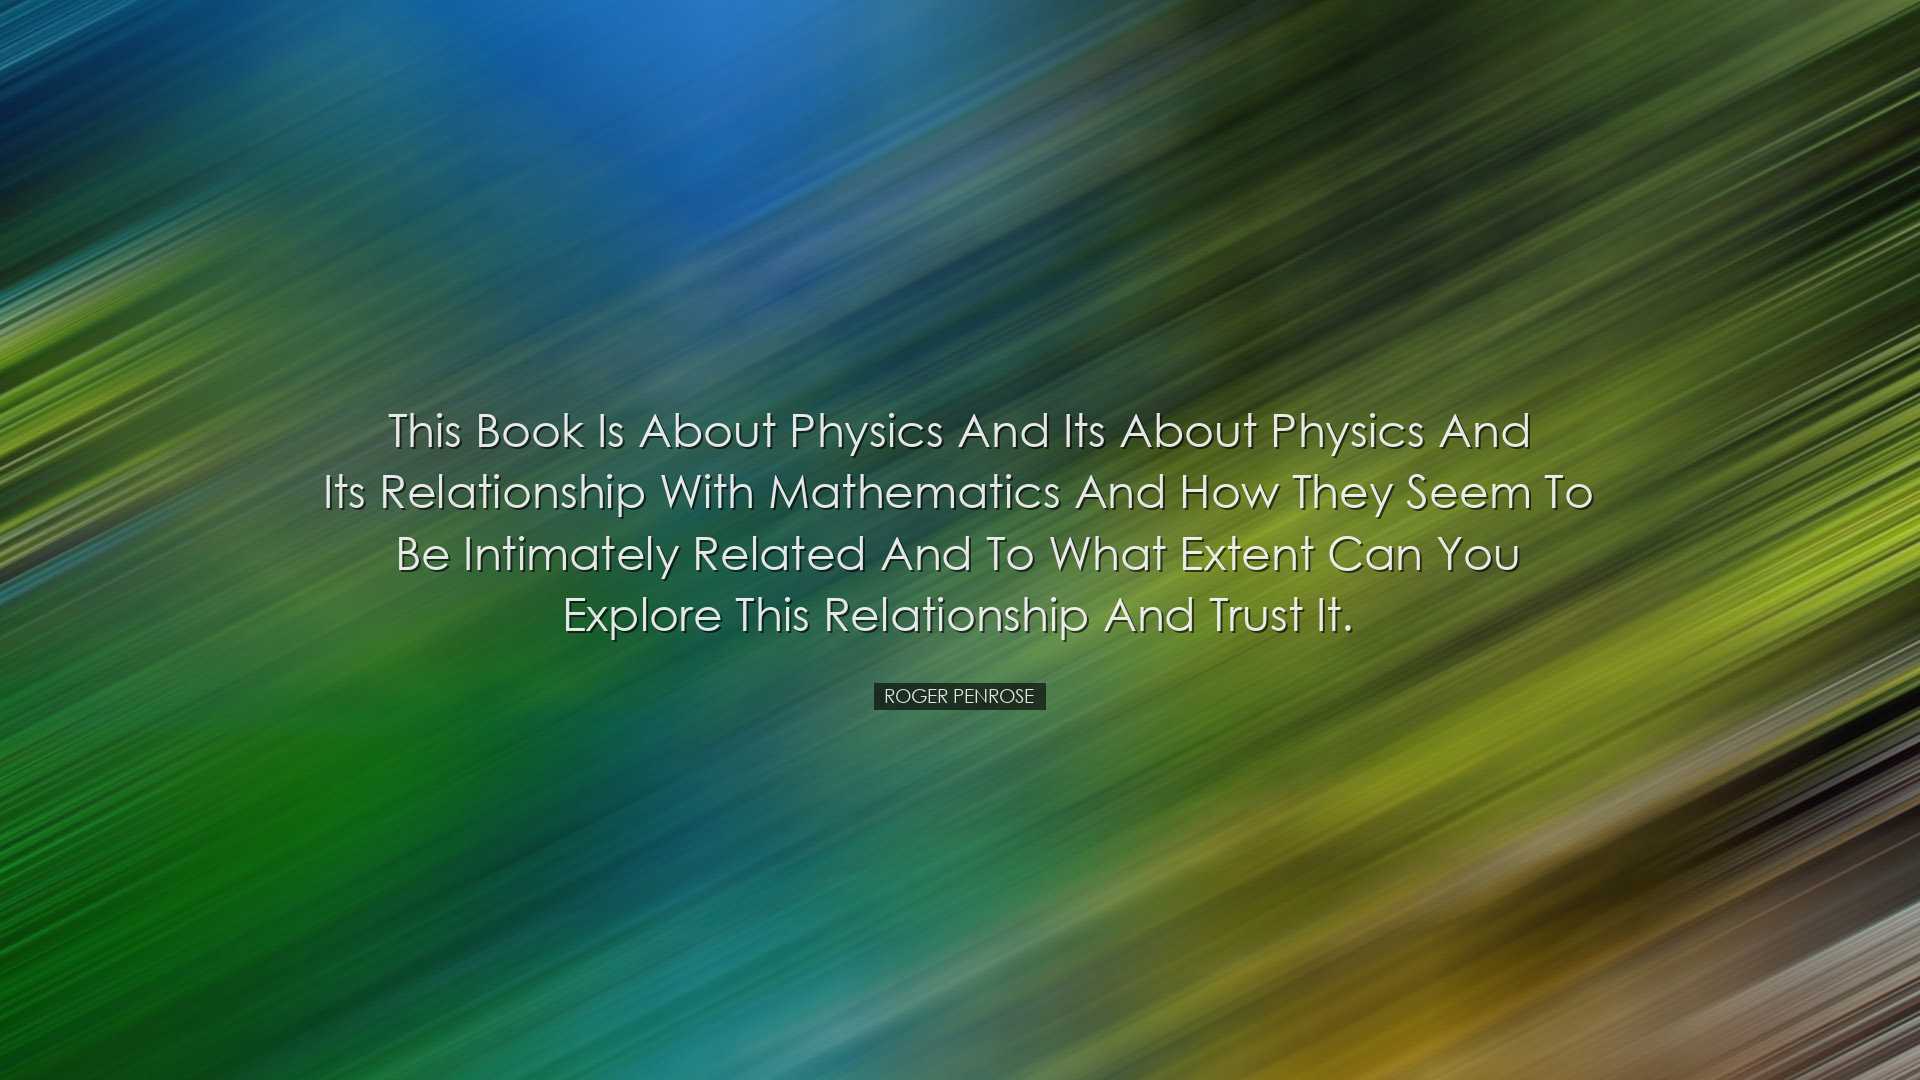 This book is about physics and its about physics and its relations